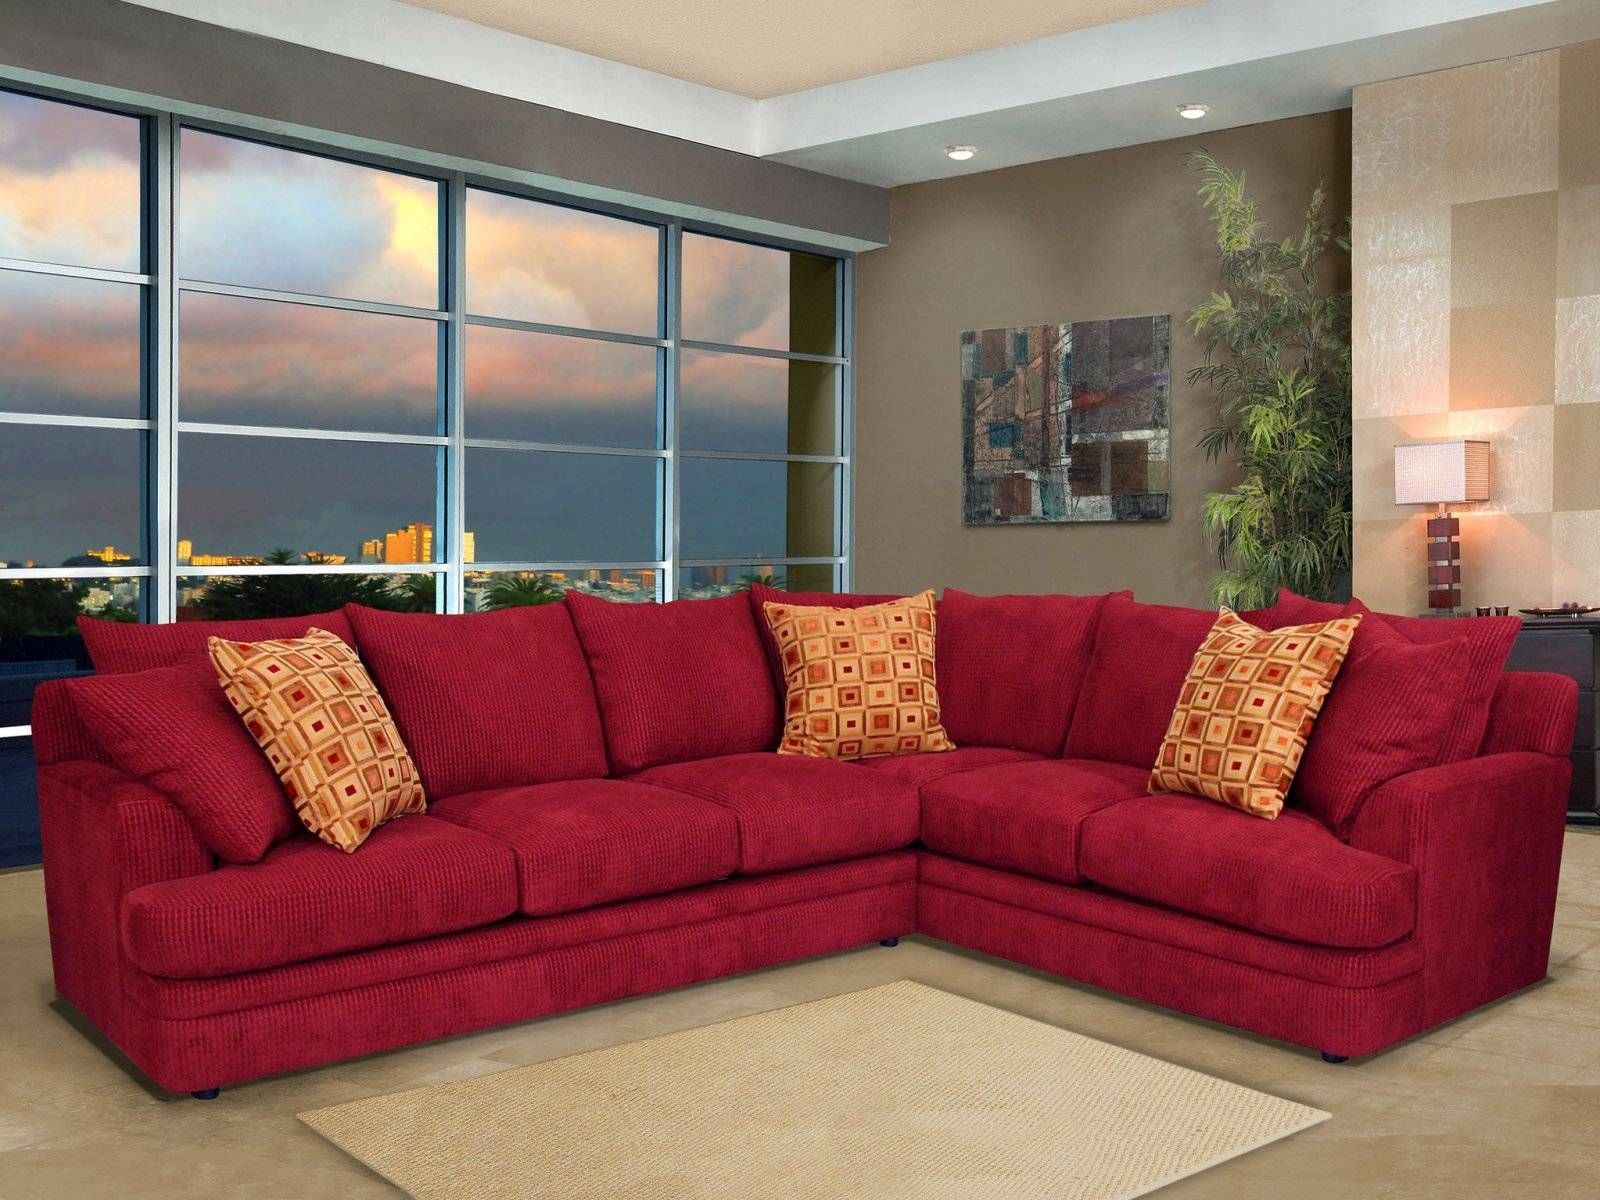 ☆▻ Sofa : 28 Red Velvet L Shaped Sectional Couch With Square Red For Floor Couch Cushions (View 22 of 30)